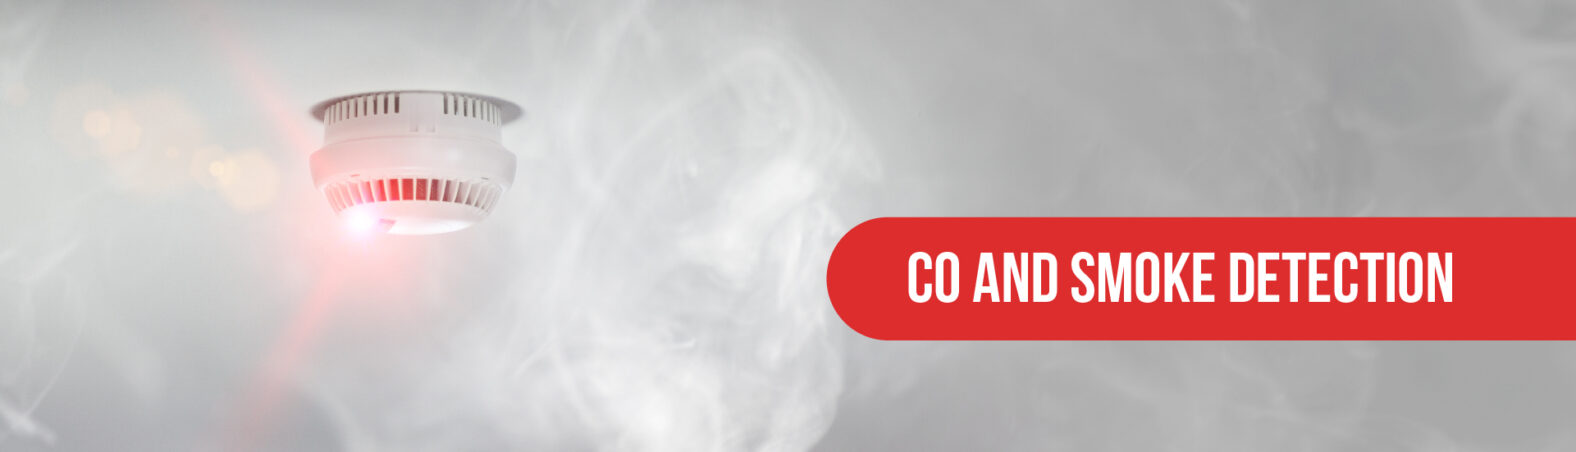 Carbon monoxide & smoke detectors can alert you to dangerous levels of CO and smoke in your home or business